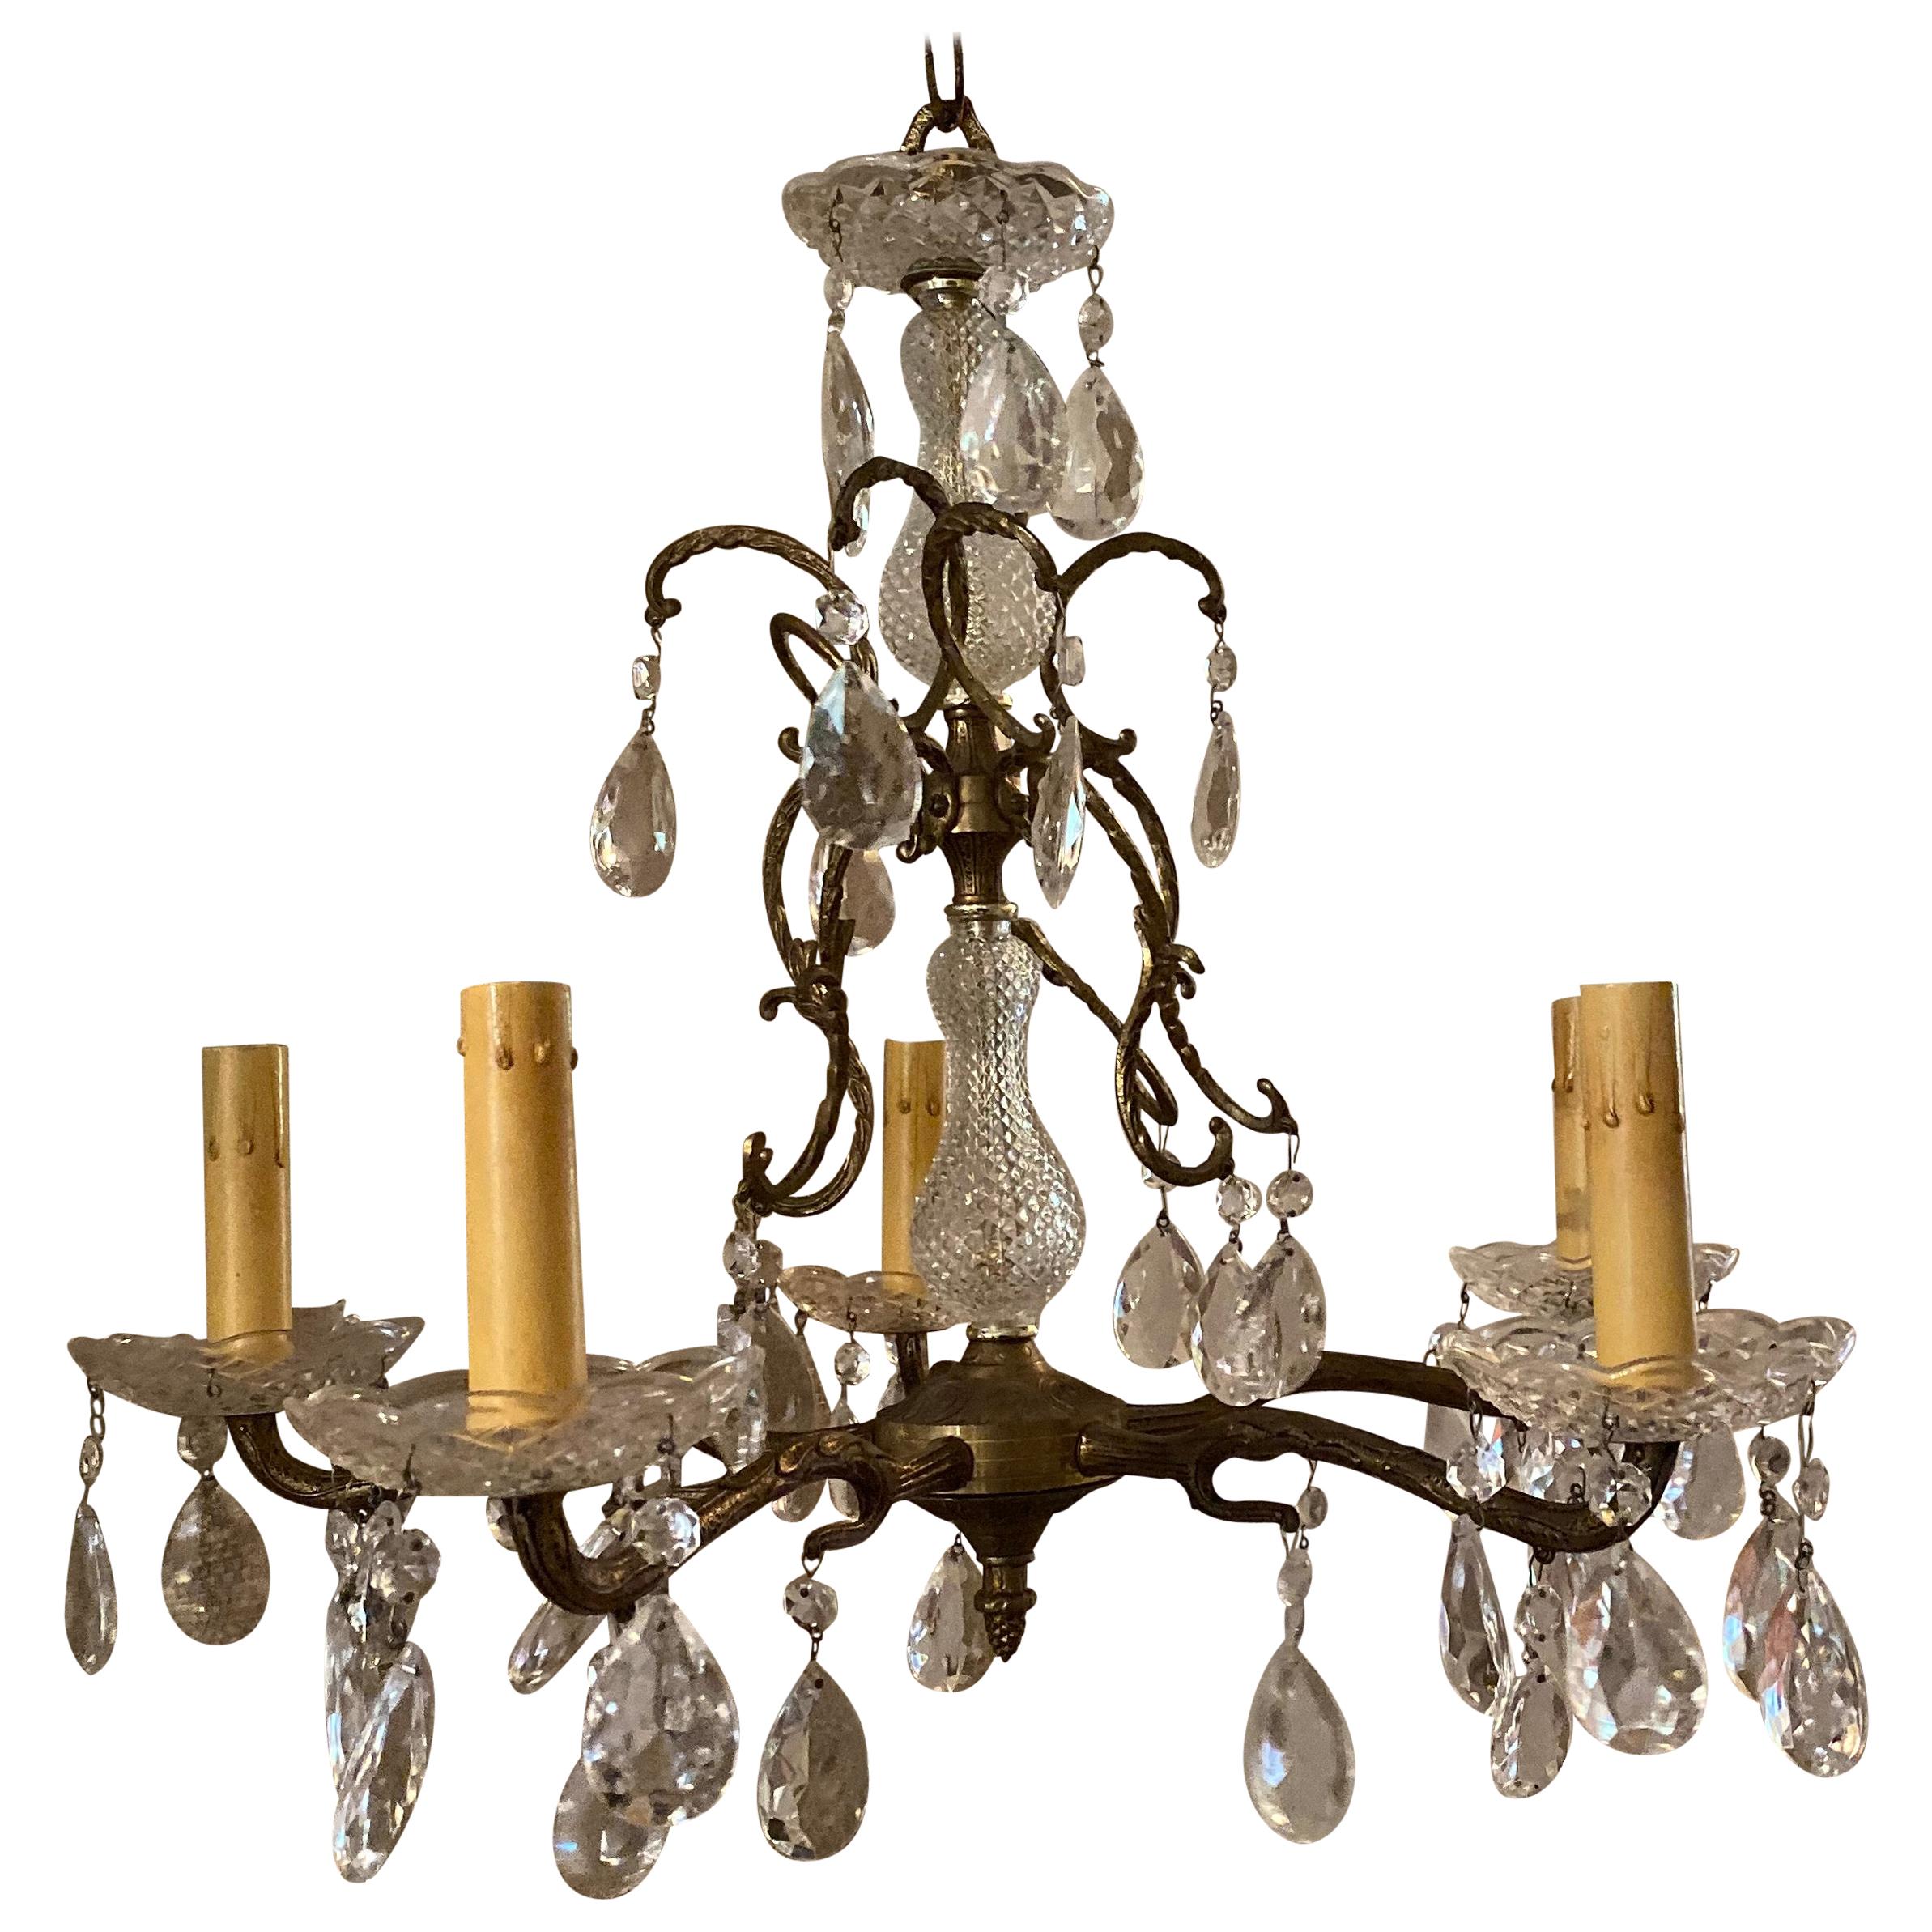 Vintage French Crystal and Bronze Chandelier from Marche Aux Puces, Paris For Sale